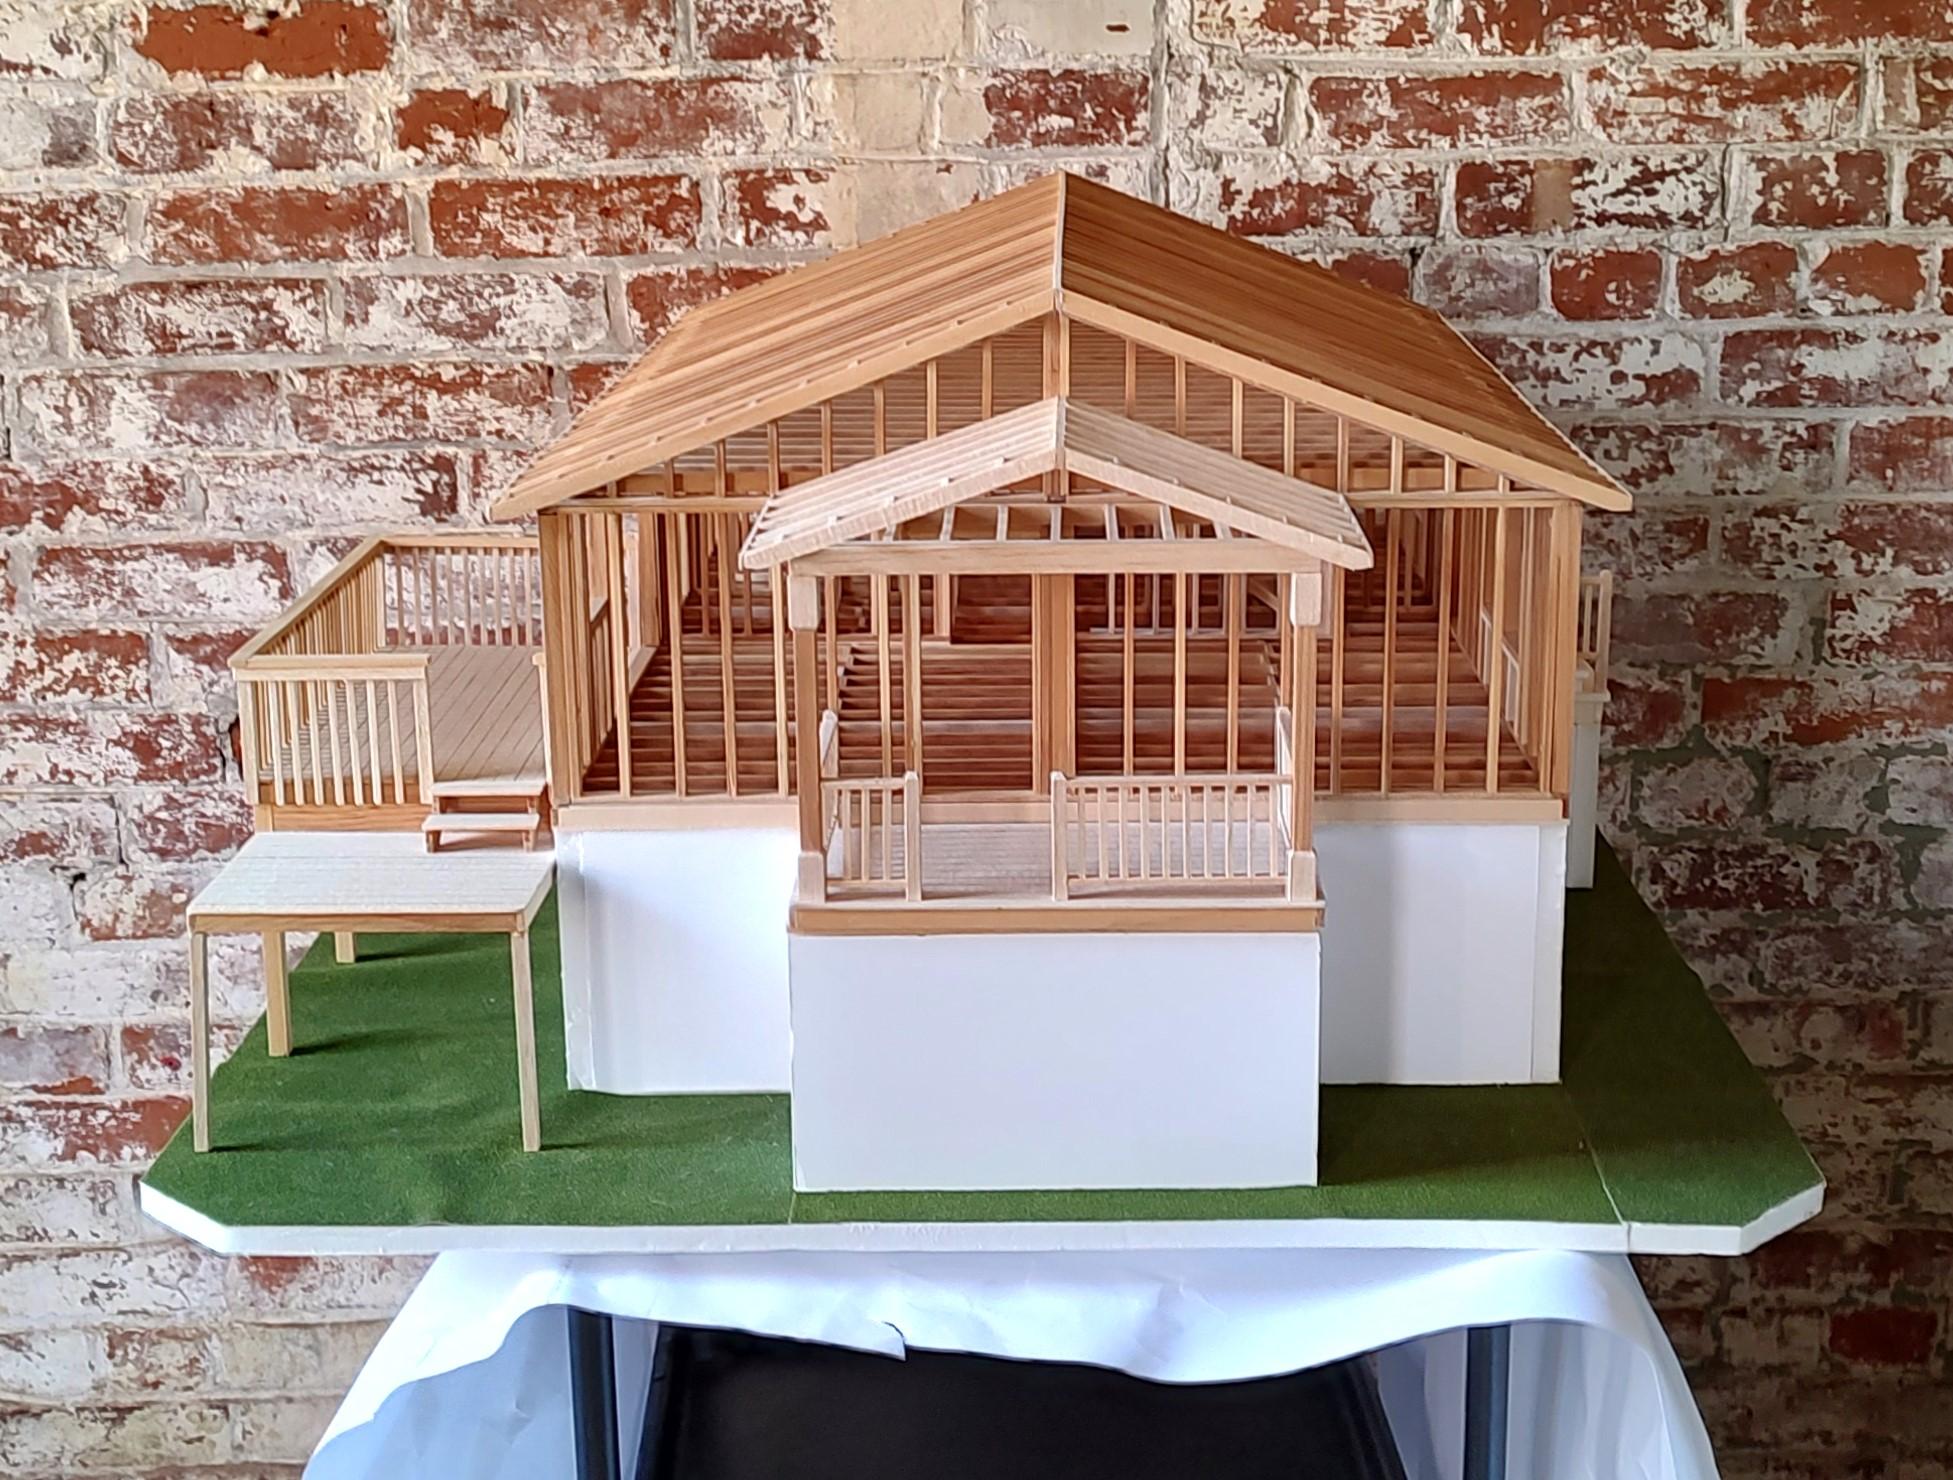 Apprentice model of timber framed house.

Overall dimensions: 31